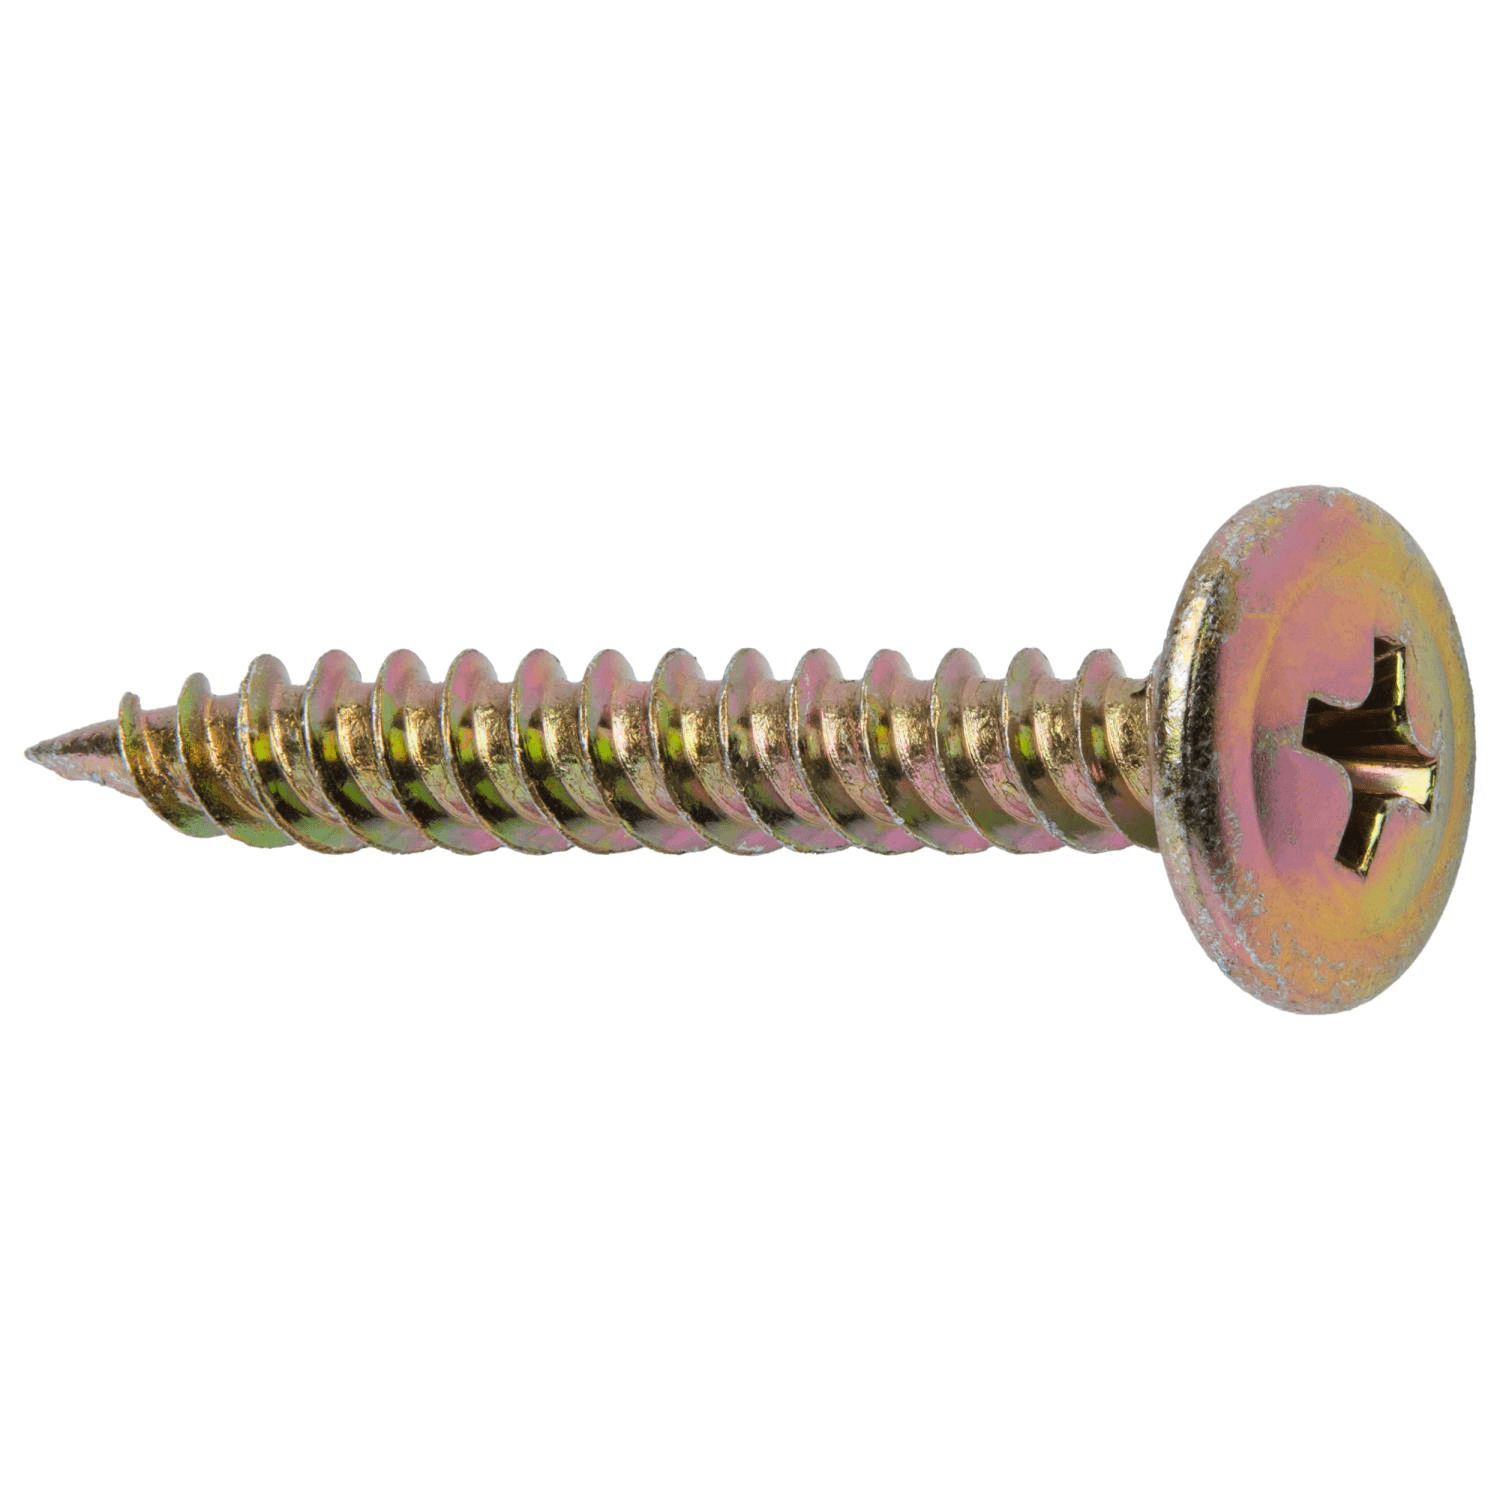 Button Head Needle Point Screw 8g x 32mm - 400 Pack